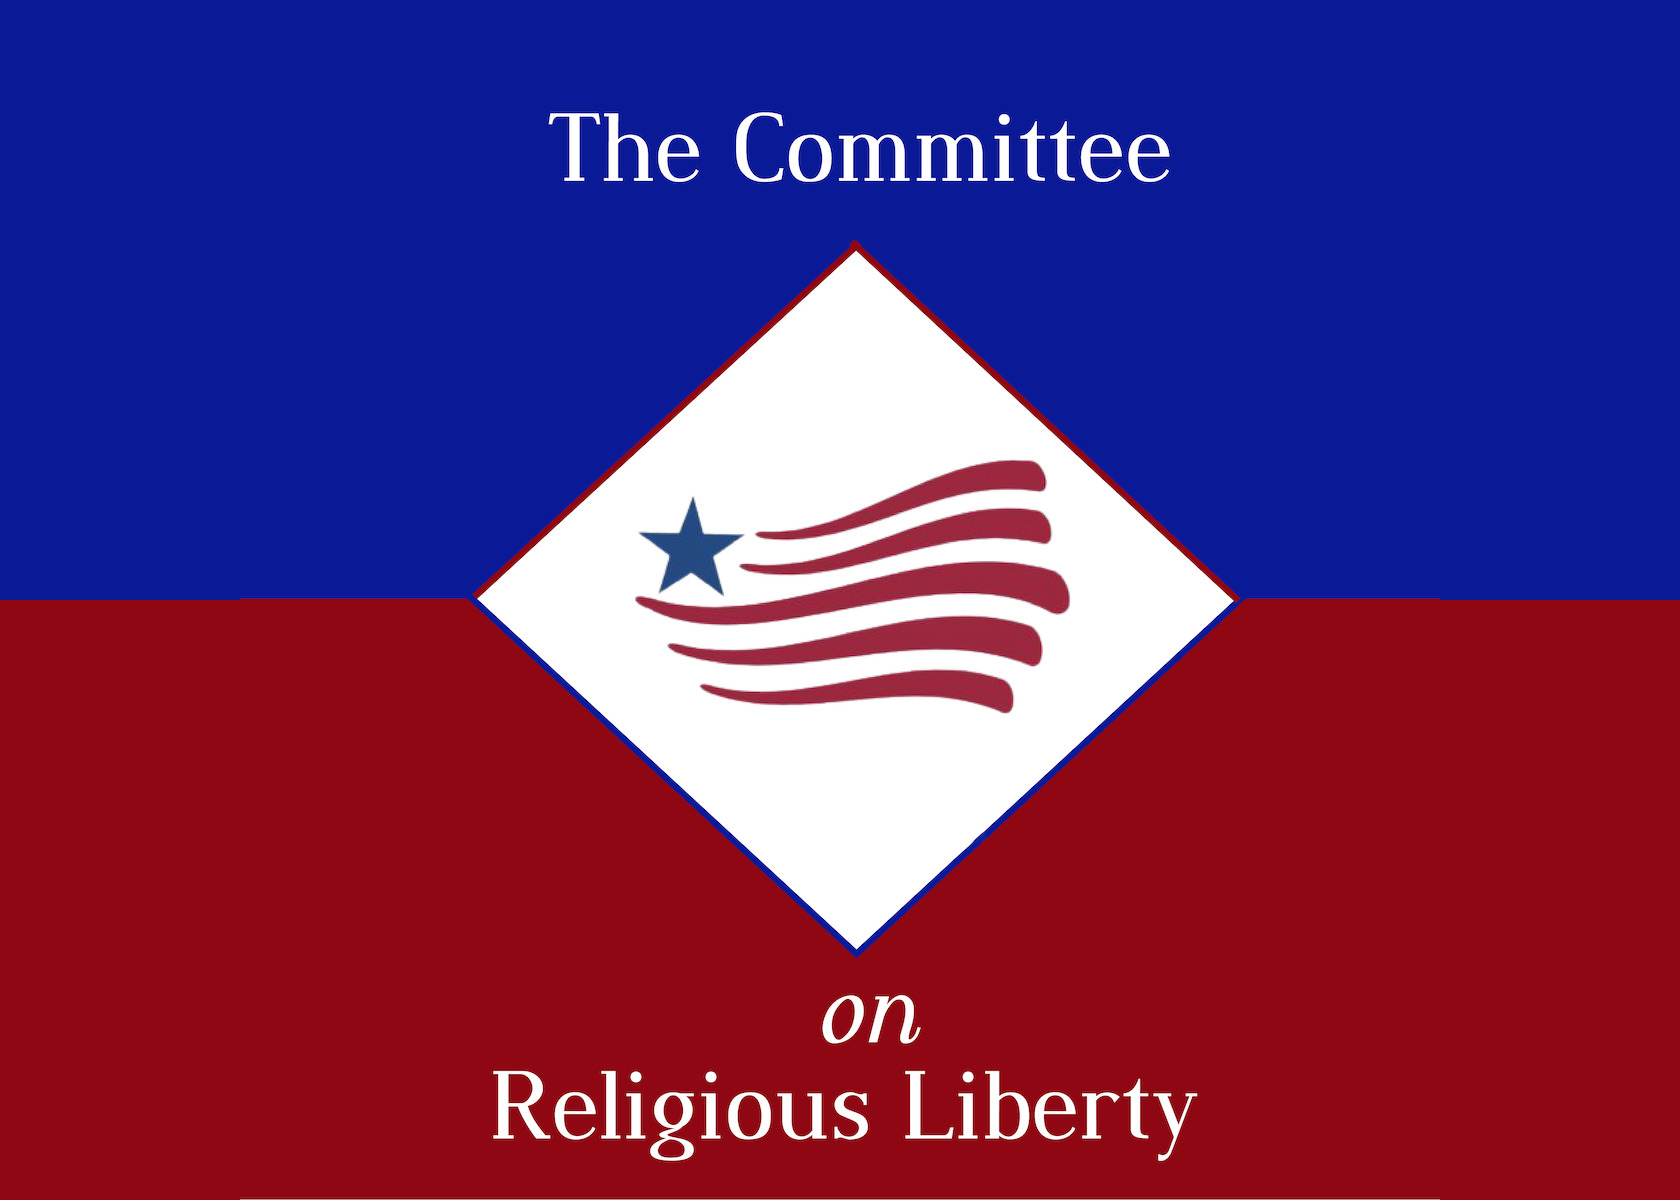 Global Peace Foundation | The Committee on Religious Liberty